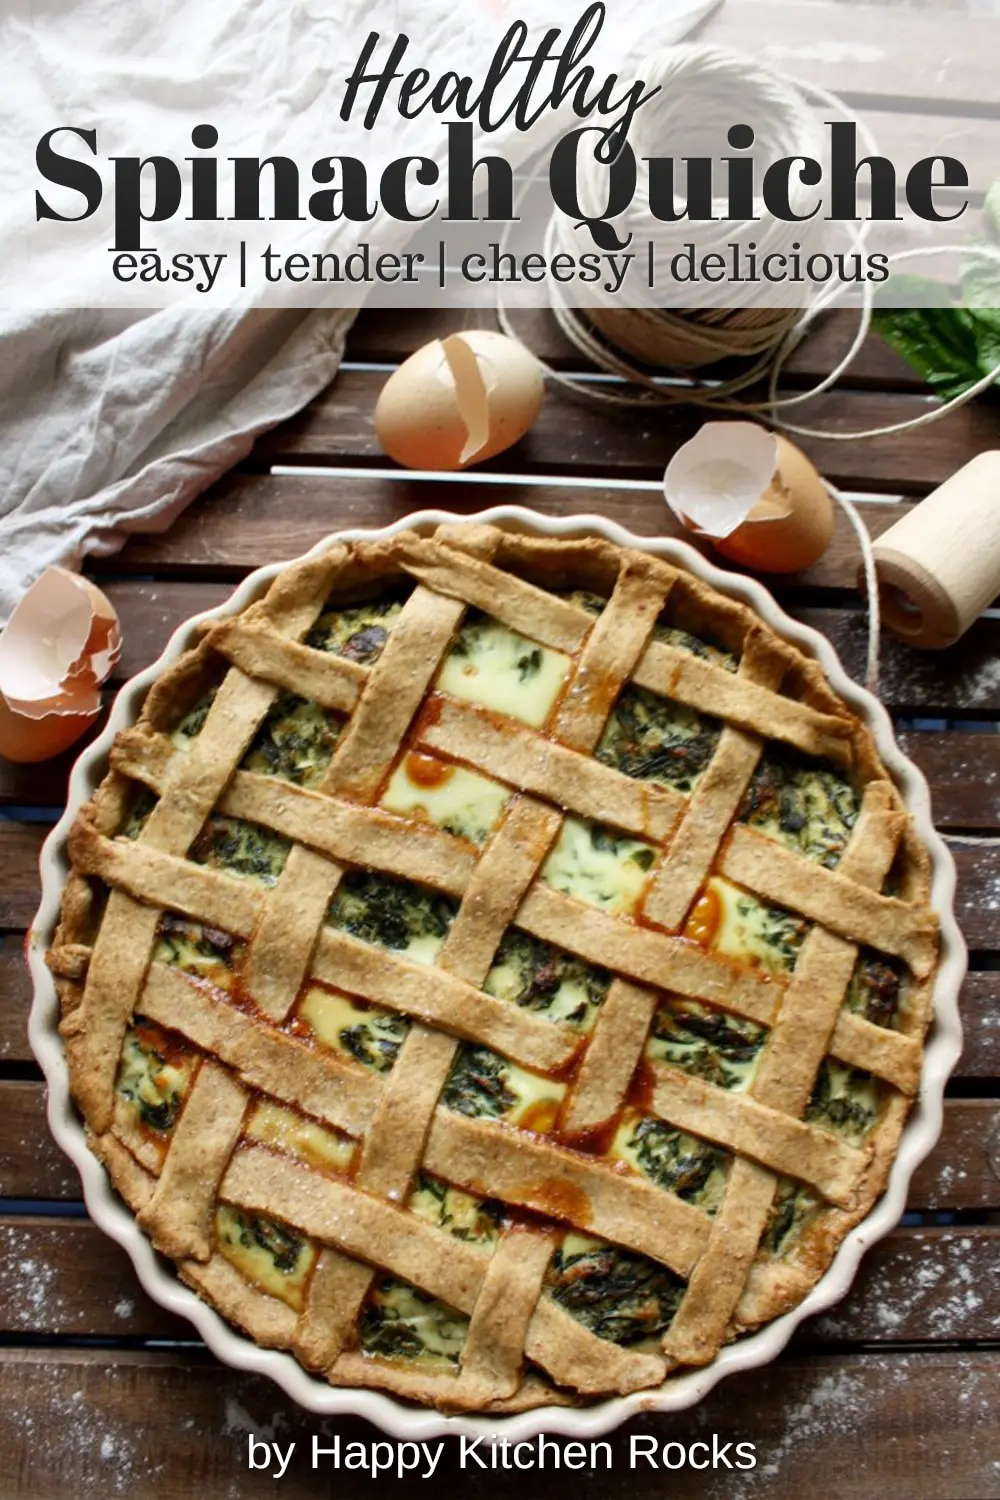 The Best Rustic Ricotta Spinach Quiche Overhead Collage with Text Overlay